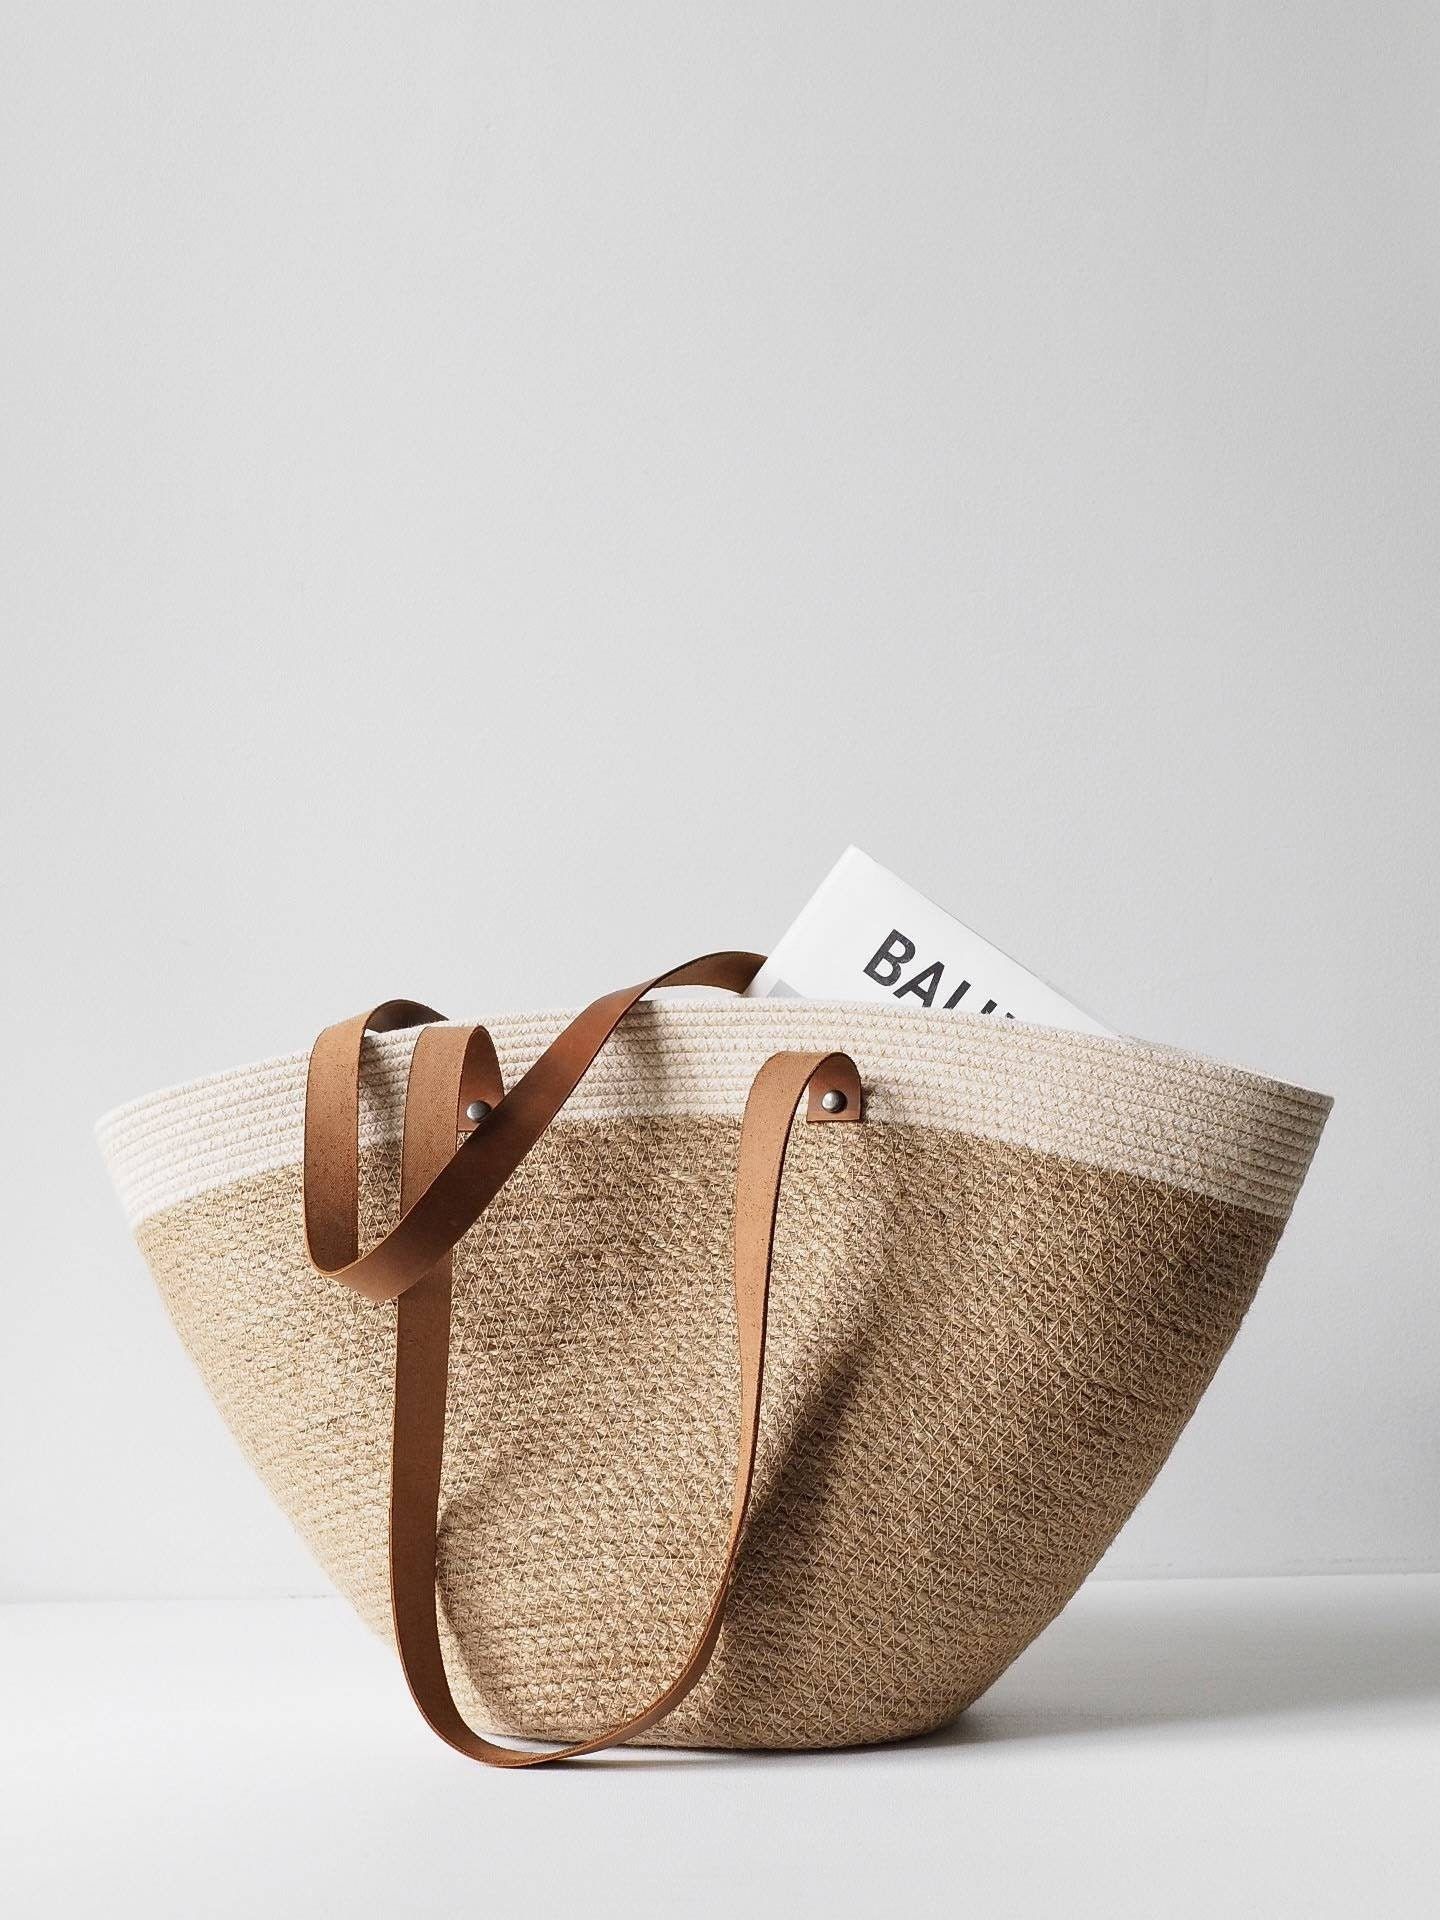 Jute Bags: Eco-Friendly and Stylish Carriers for Everyday Use